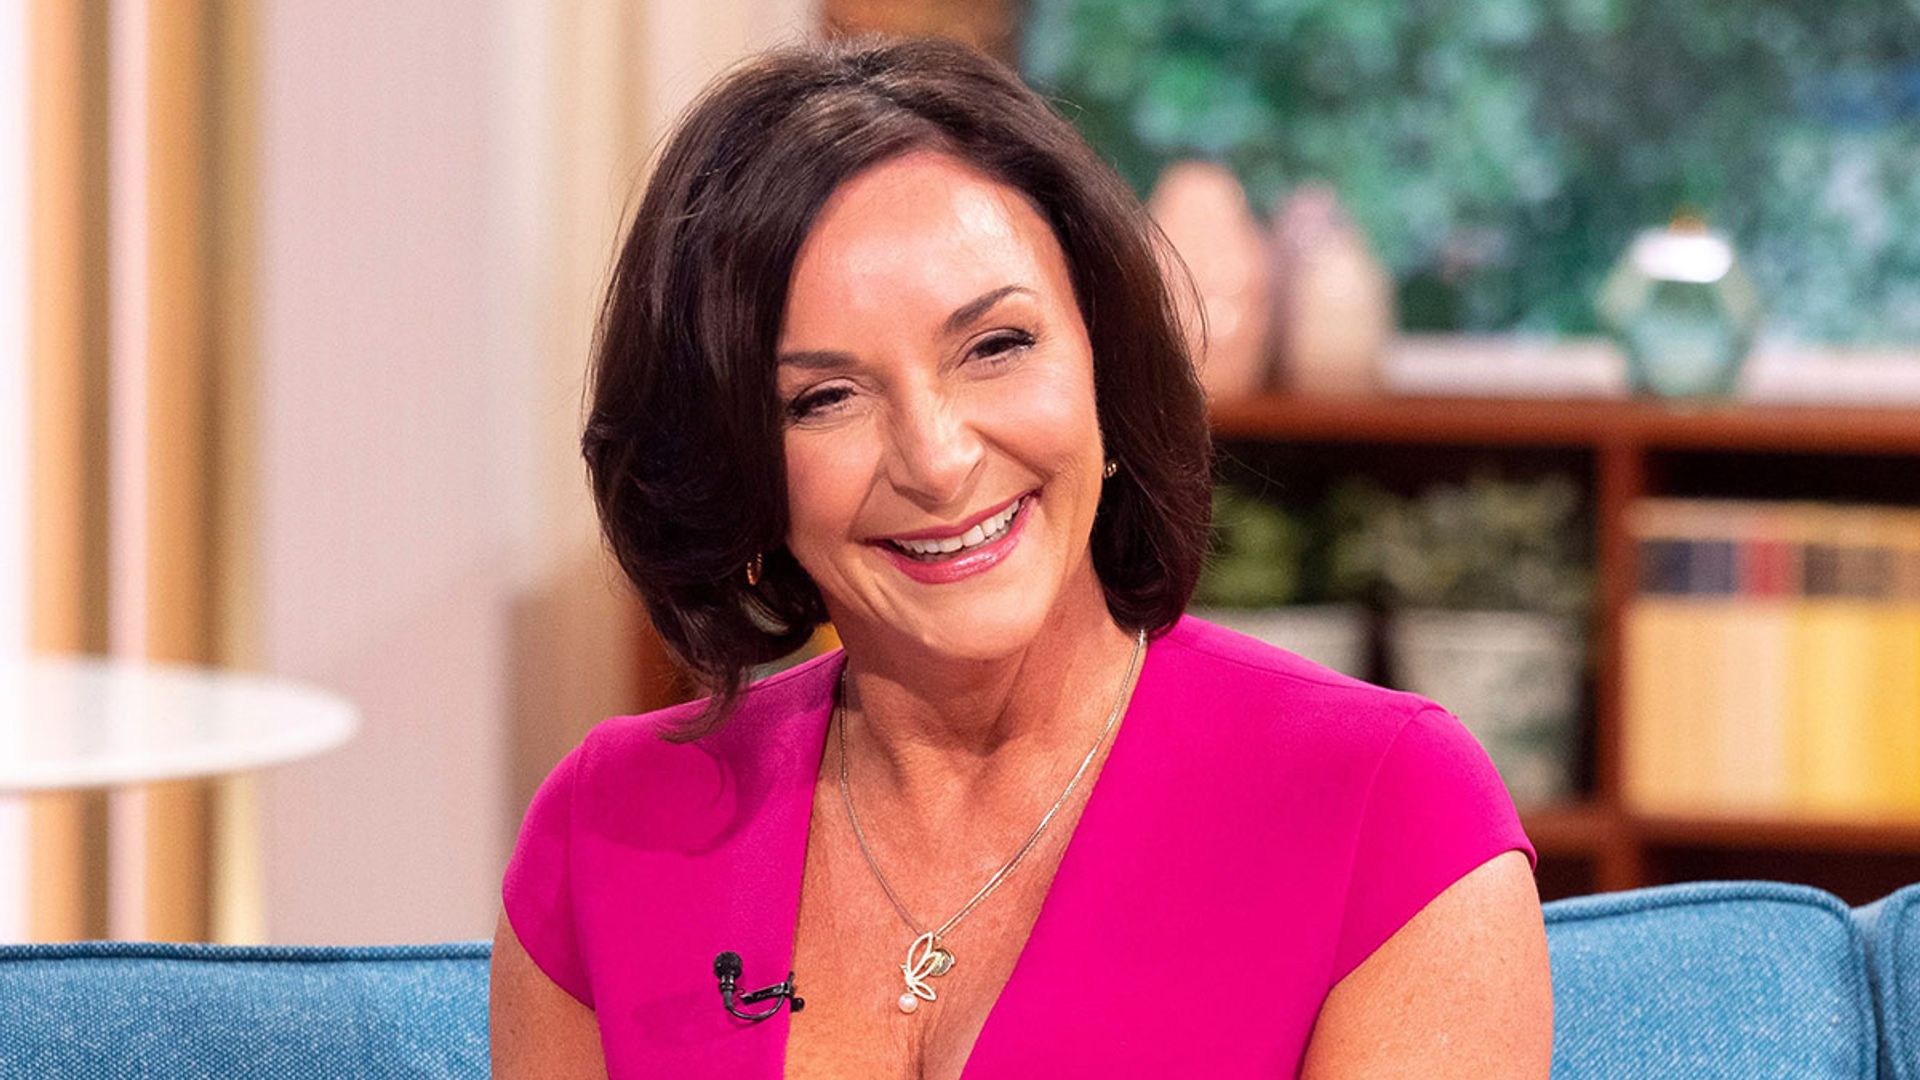 Shirley Ballas thanks fans for helping uncover 'concerning' health problem  | Independent.ie